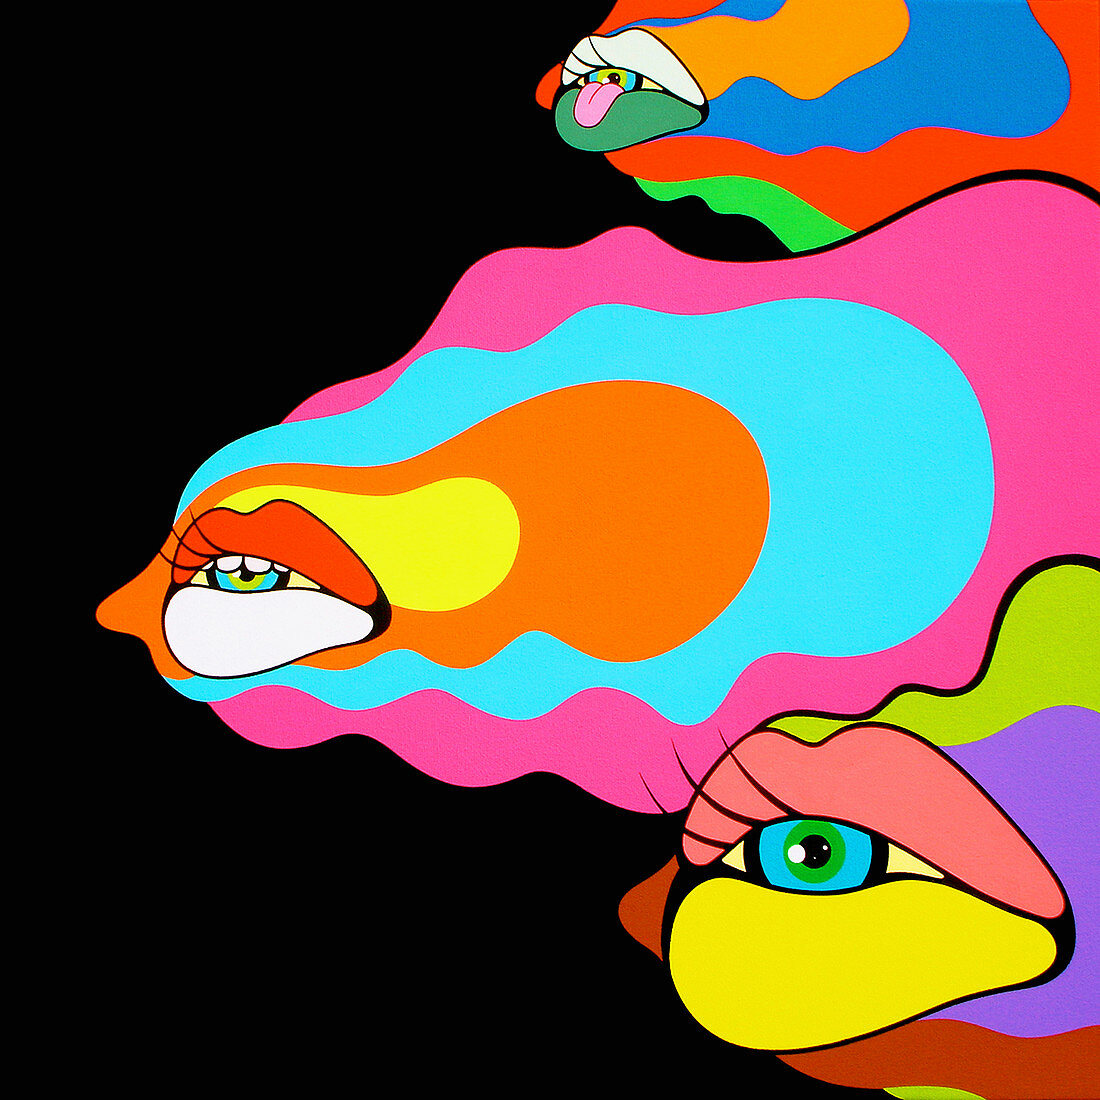 Psychedelic mouths and eyes, illustration